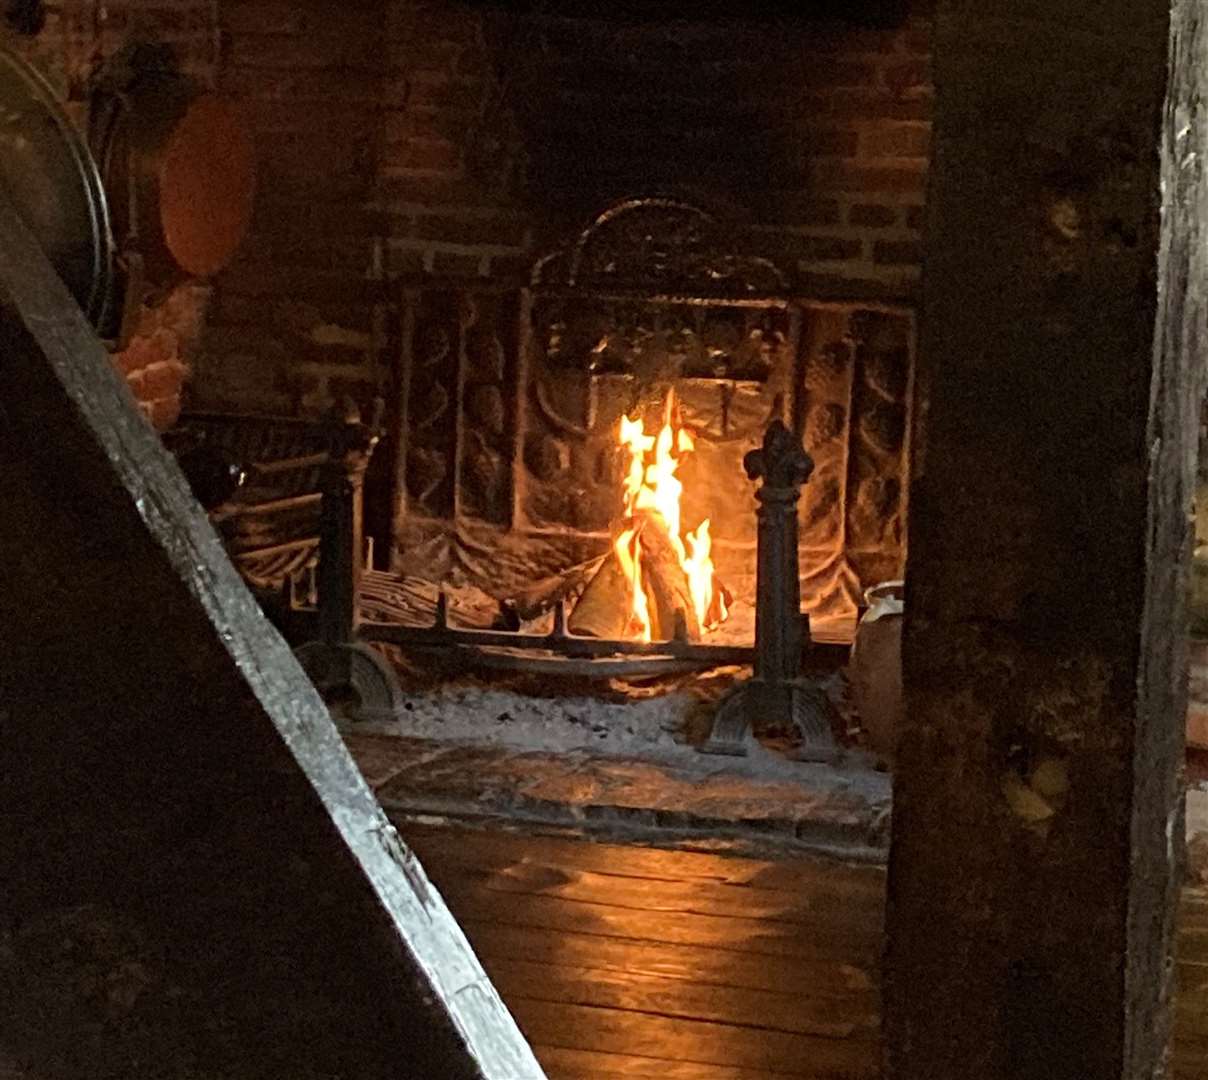 You can’t miss the impressive history of this building wherever you look – the inglenook fireplace is stunning